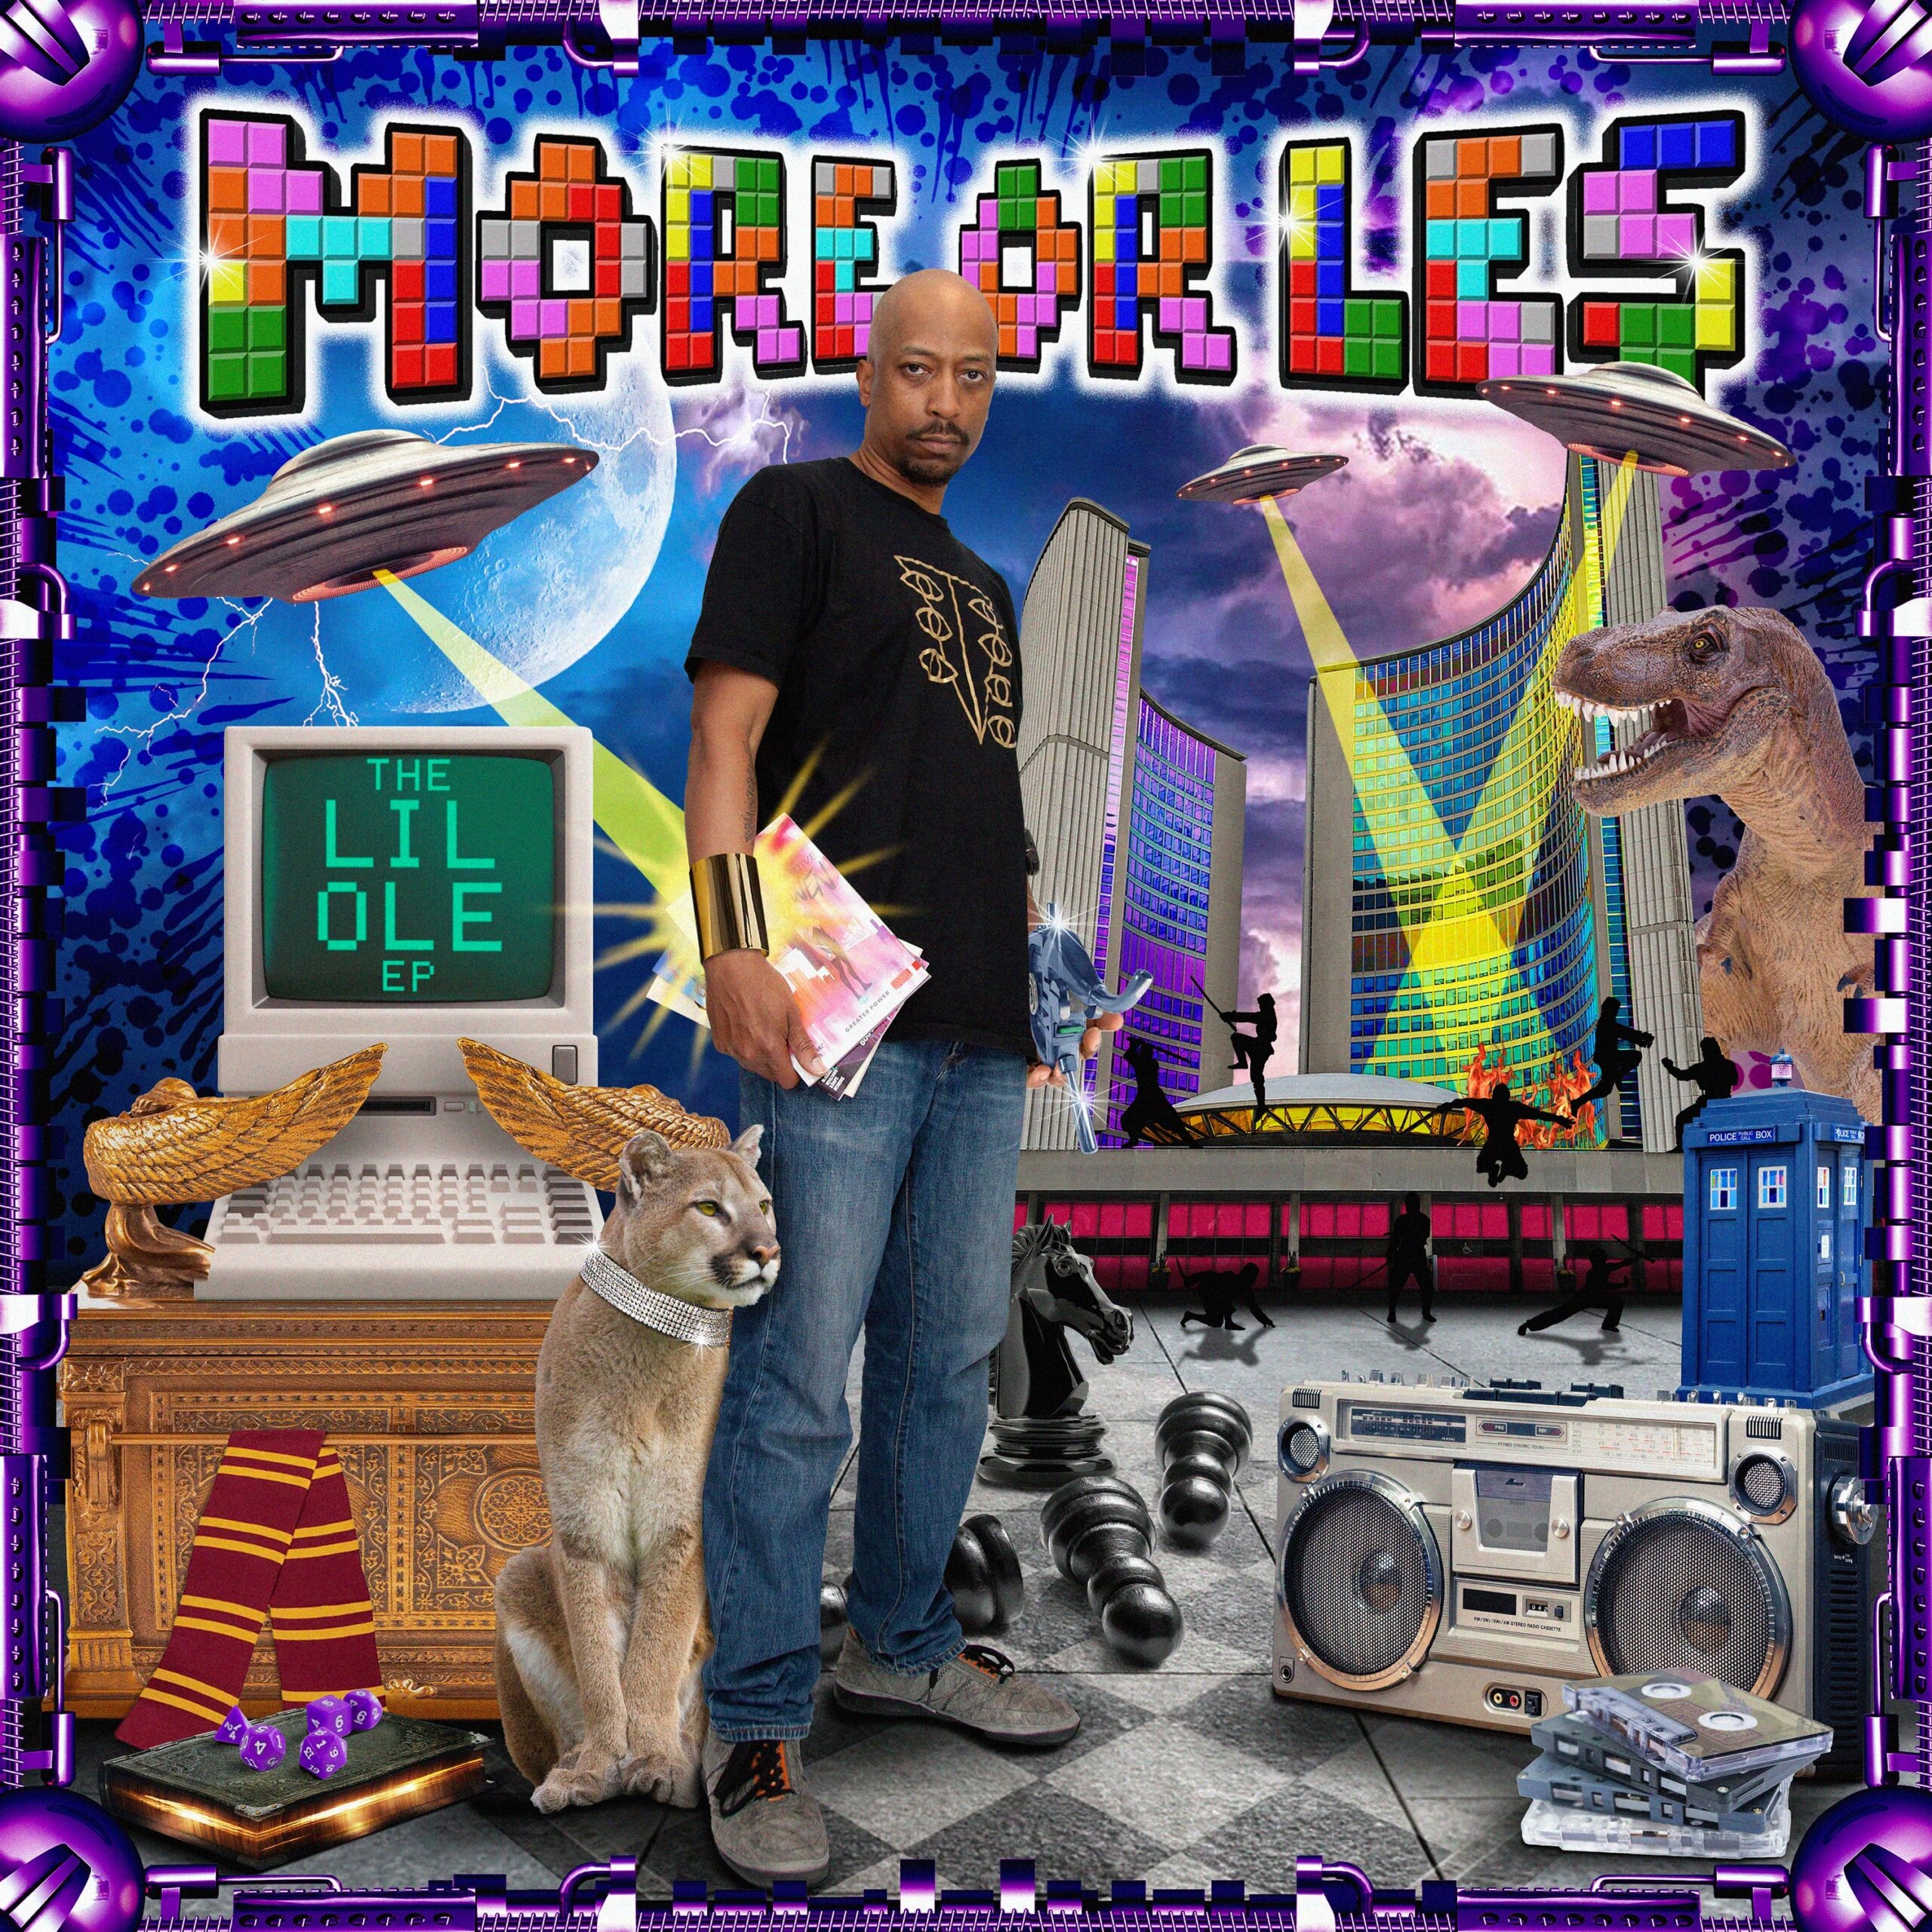 More Or Les Drops ‘The Lil' Ole EP’